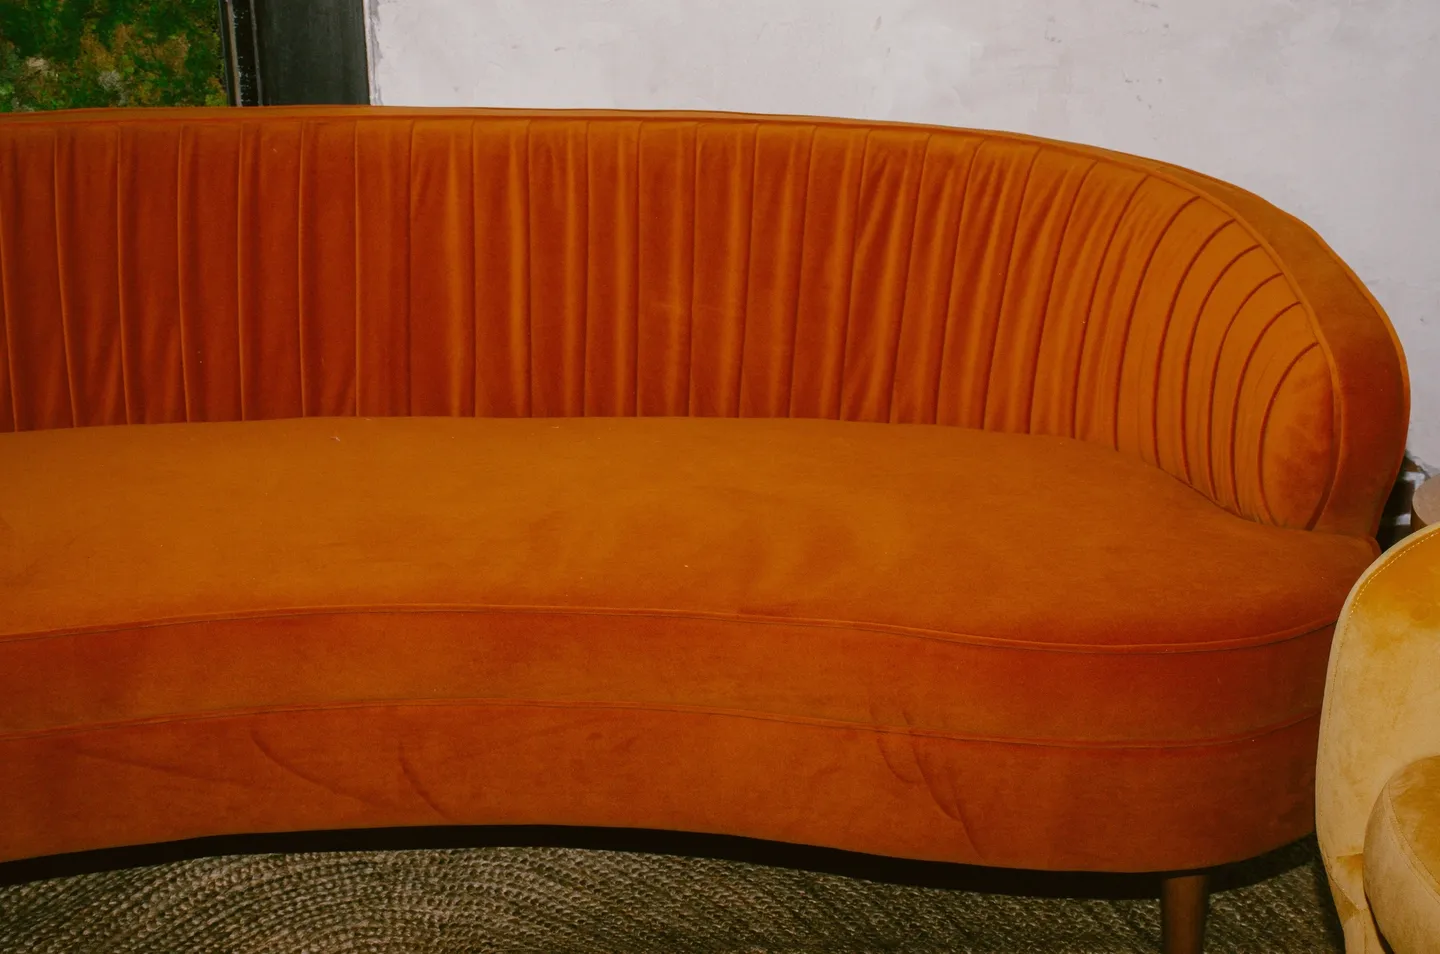 Orange upholstered curved sofa, ideal for events, with a pleated backrest.